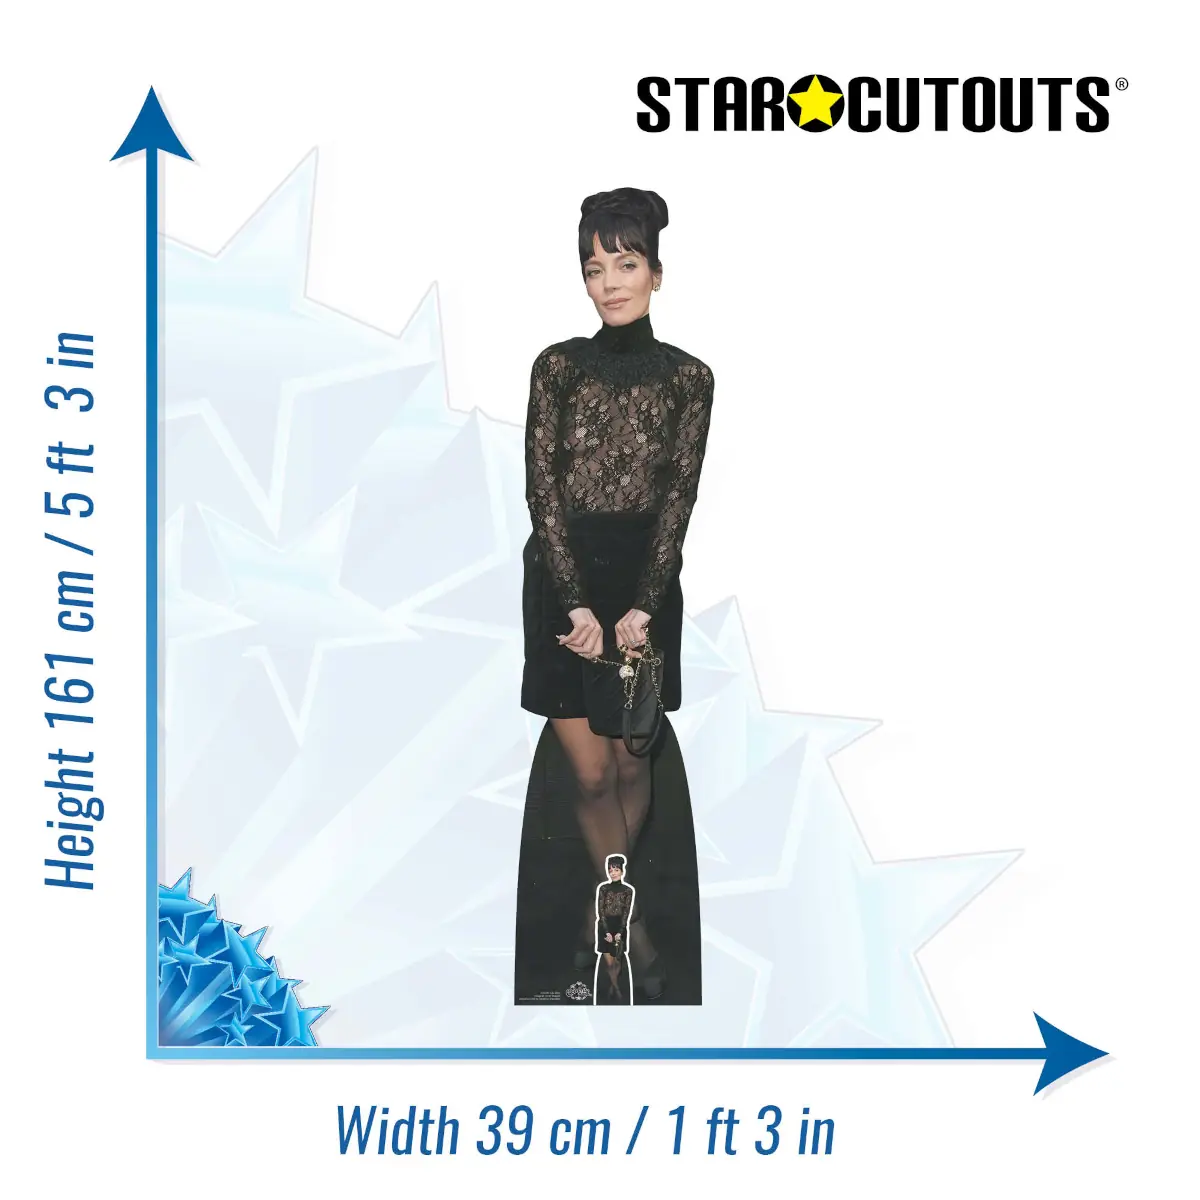 Lily Allen Black Outfit English Singer Songwriter Lifesize + Mini Cardboard Cutout Size